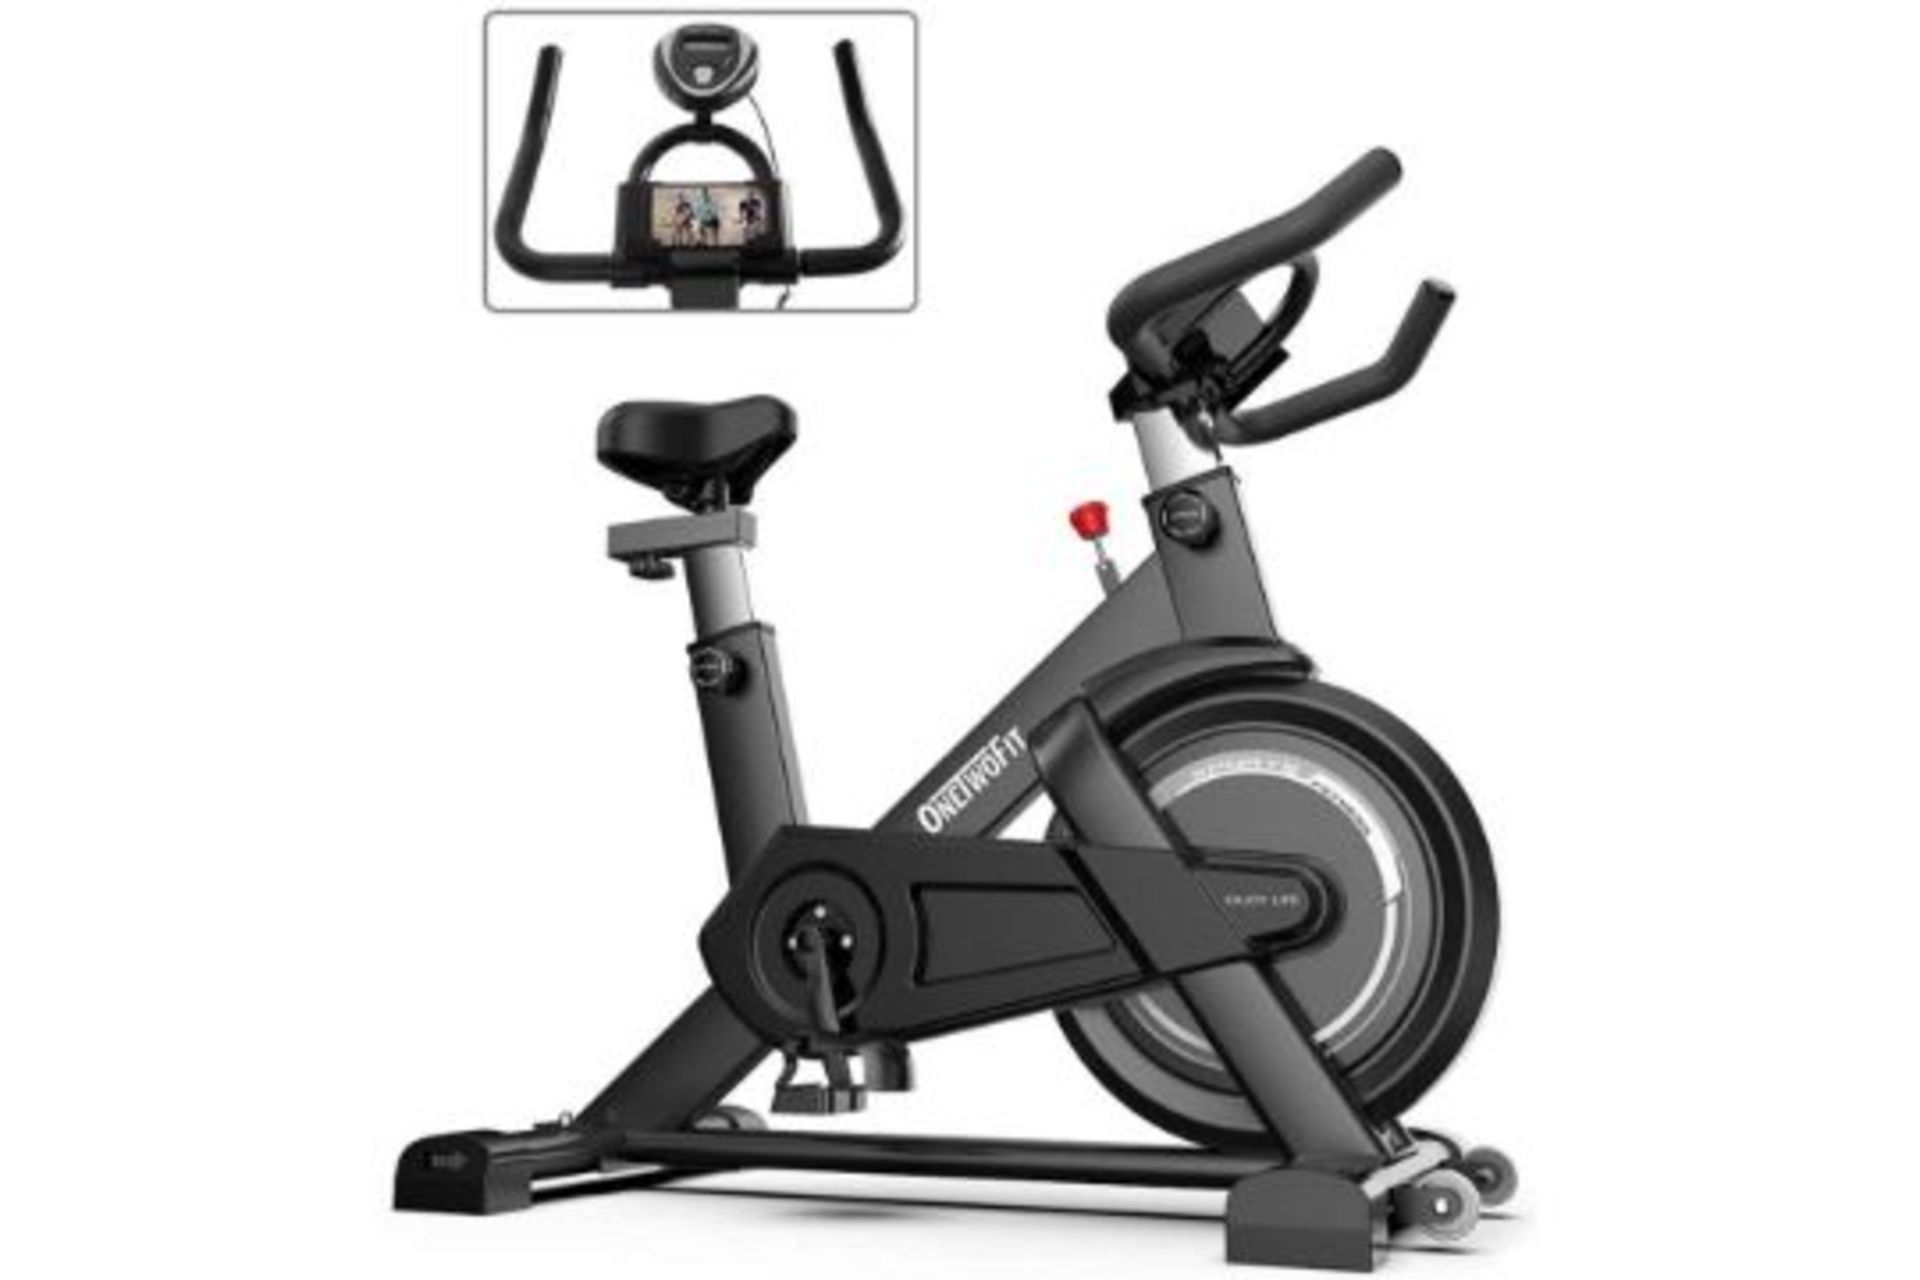 BRAND NEW GREY ONETWOFIT EXERCISE BIKE, CARDIO SPINNING BIKE WITH ADJUSTABLE HANDLEBAR AND SEAT, LCD - Image 3 of 3